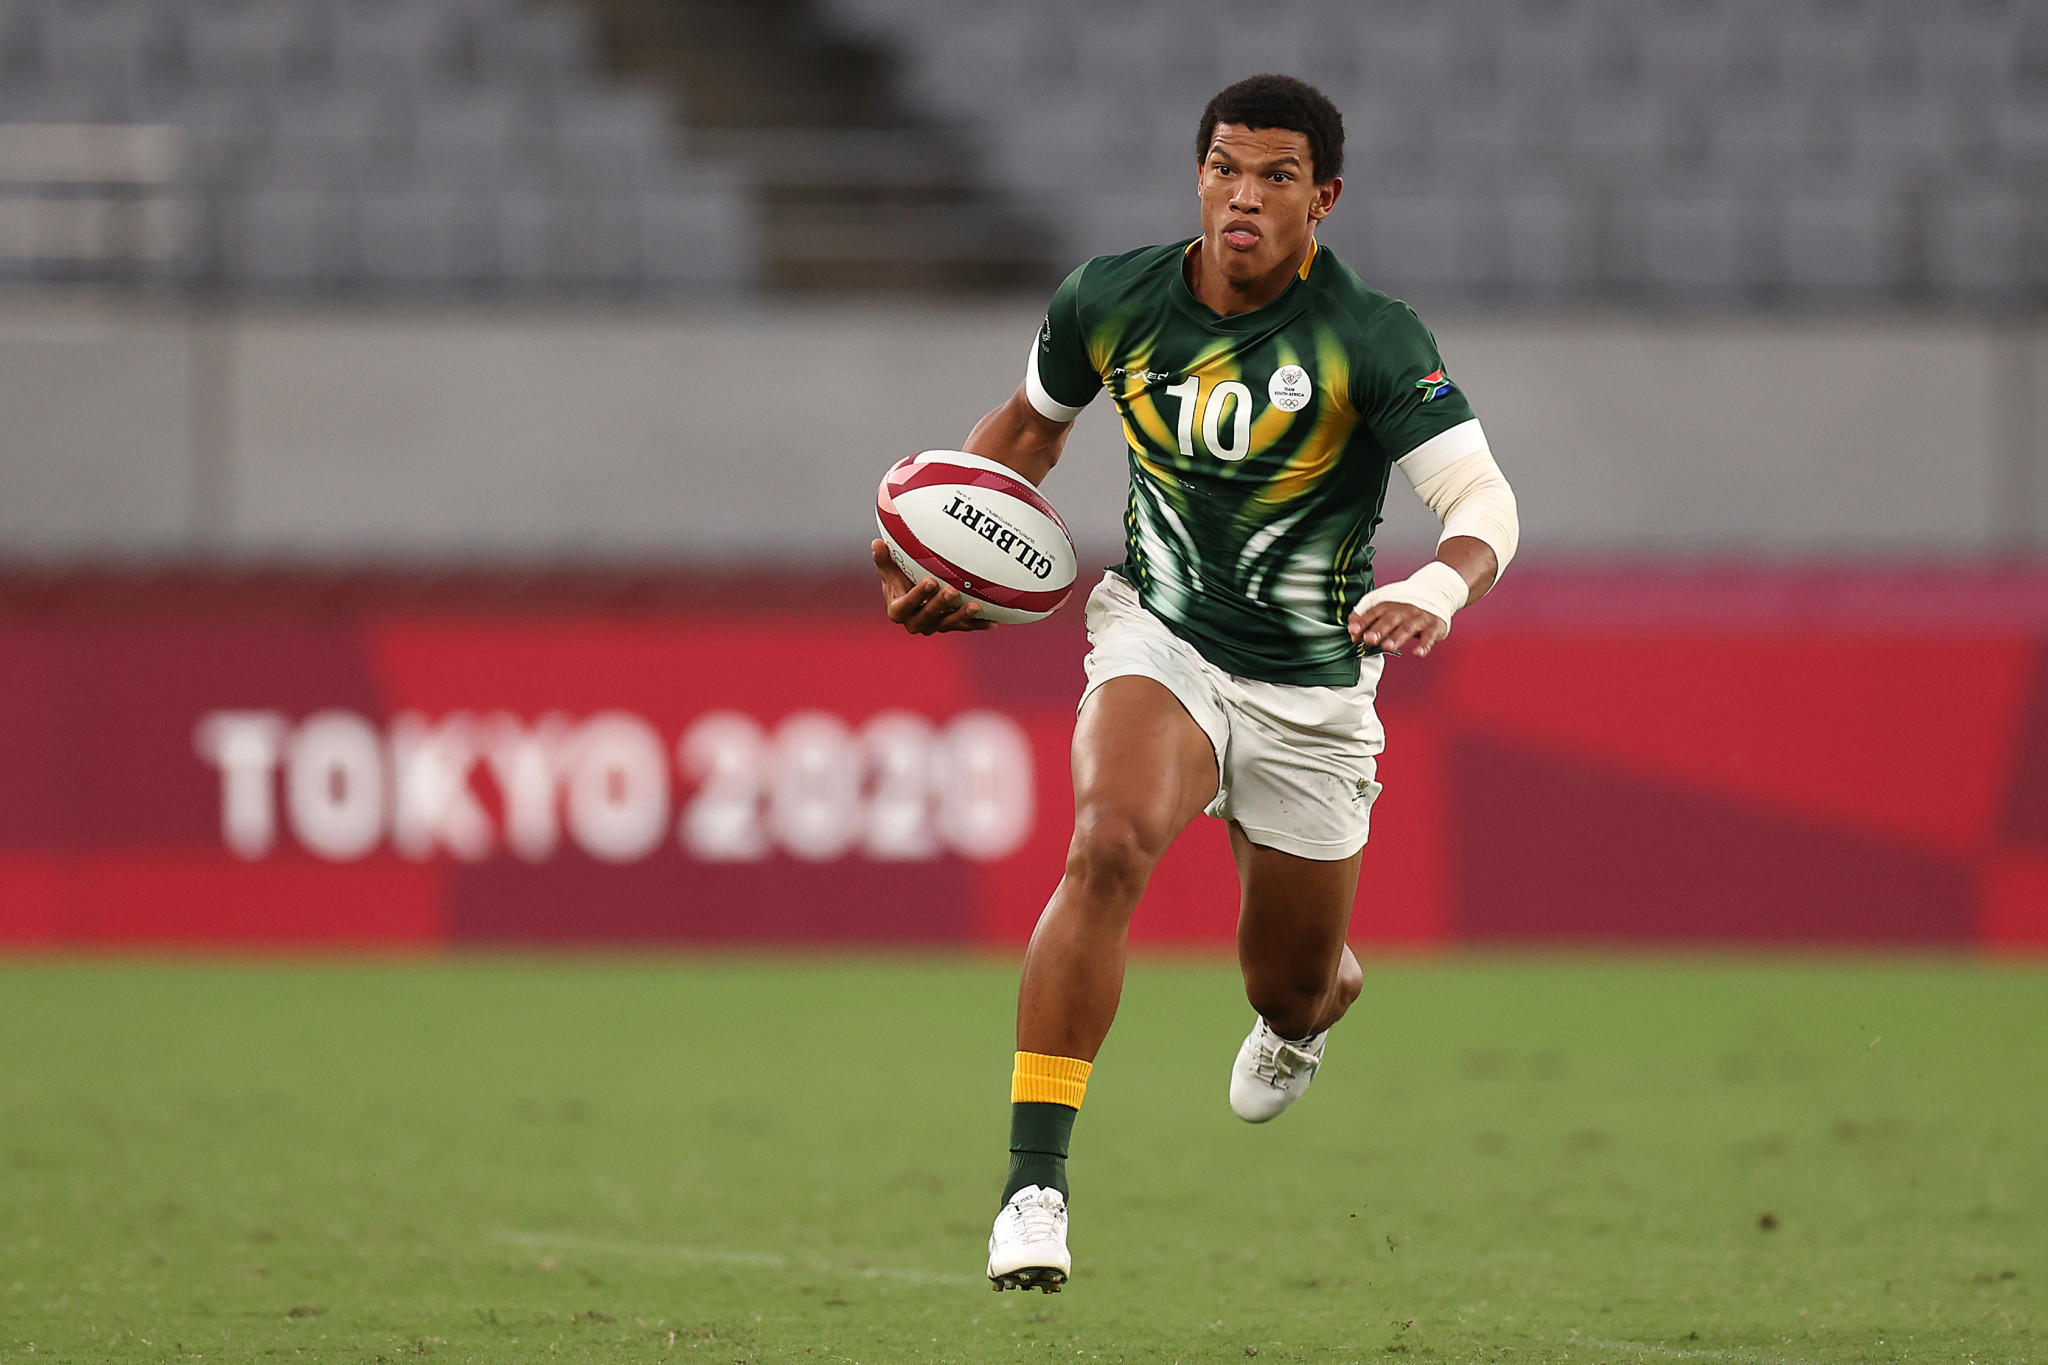 South Africa are aiming to win their fourth successive HSBC World Rugby Sevens Series event ©Getty Images